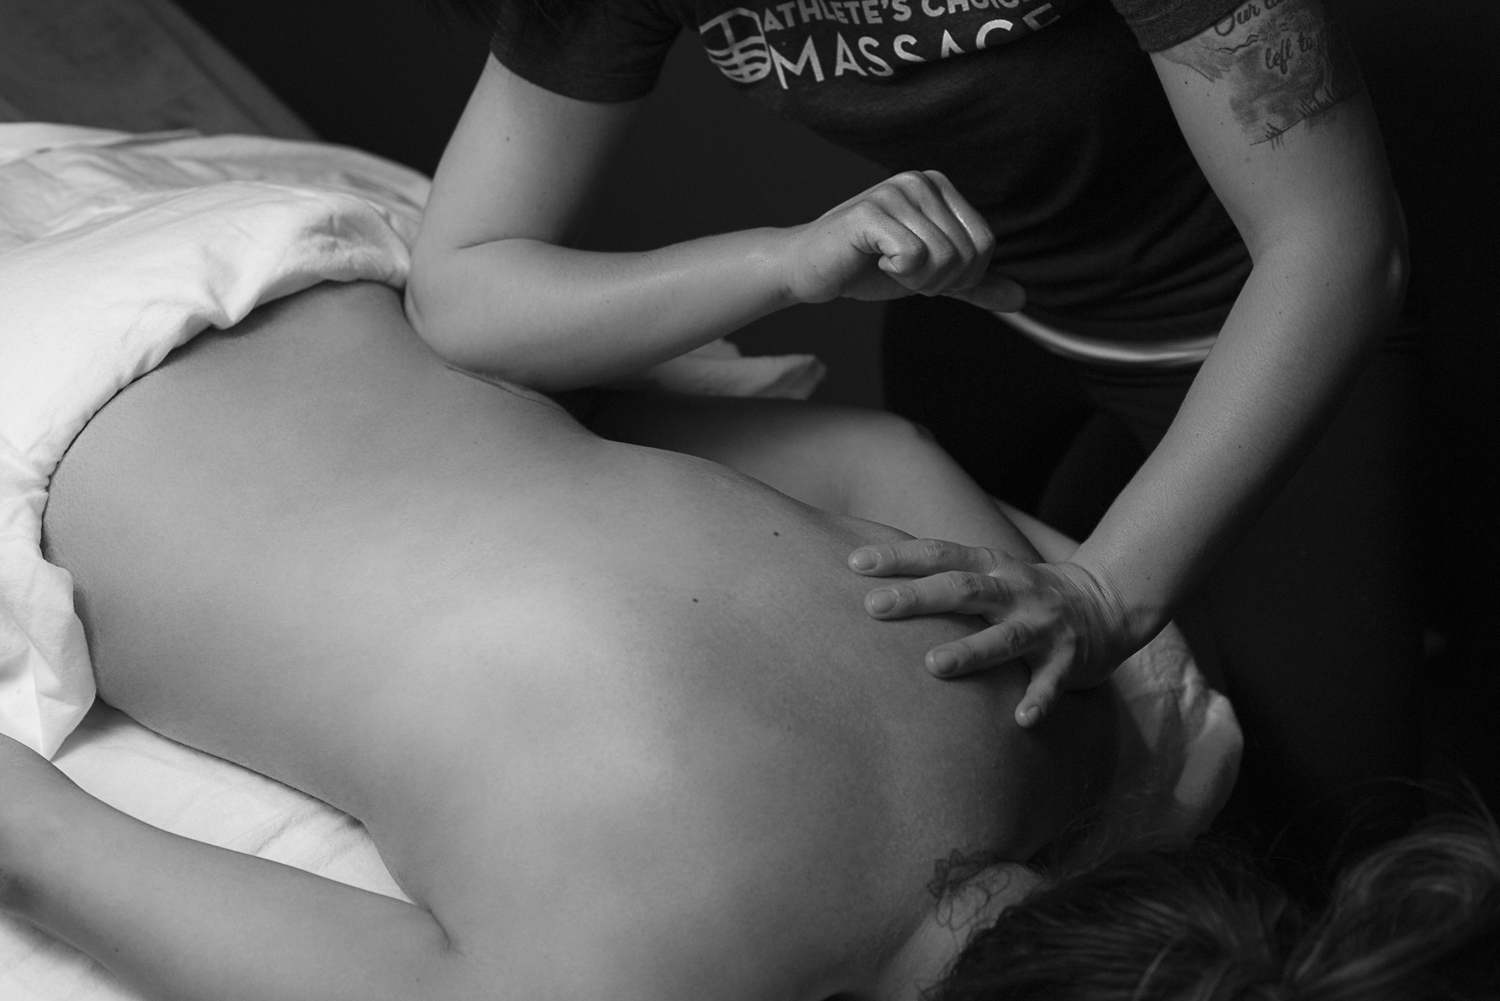 Massage for Back Pain: Is Deep Tissue the Best Choice?